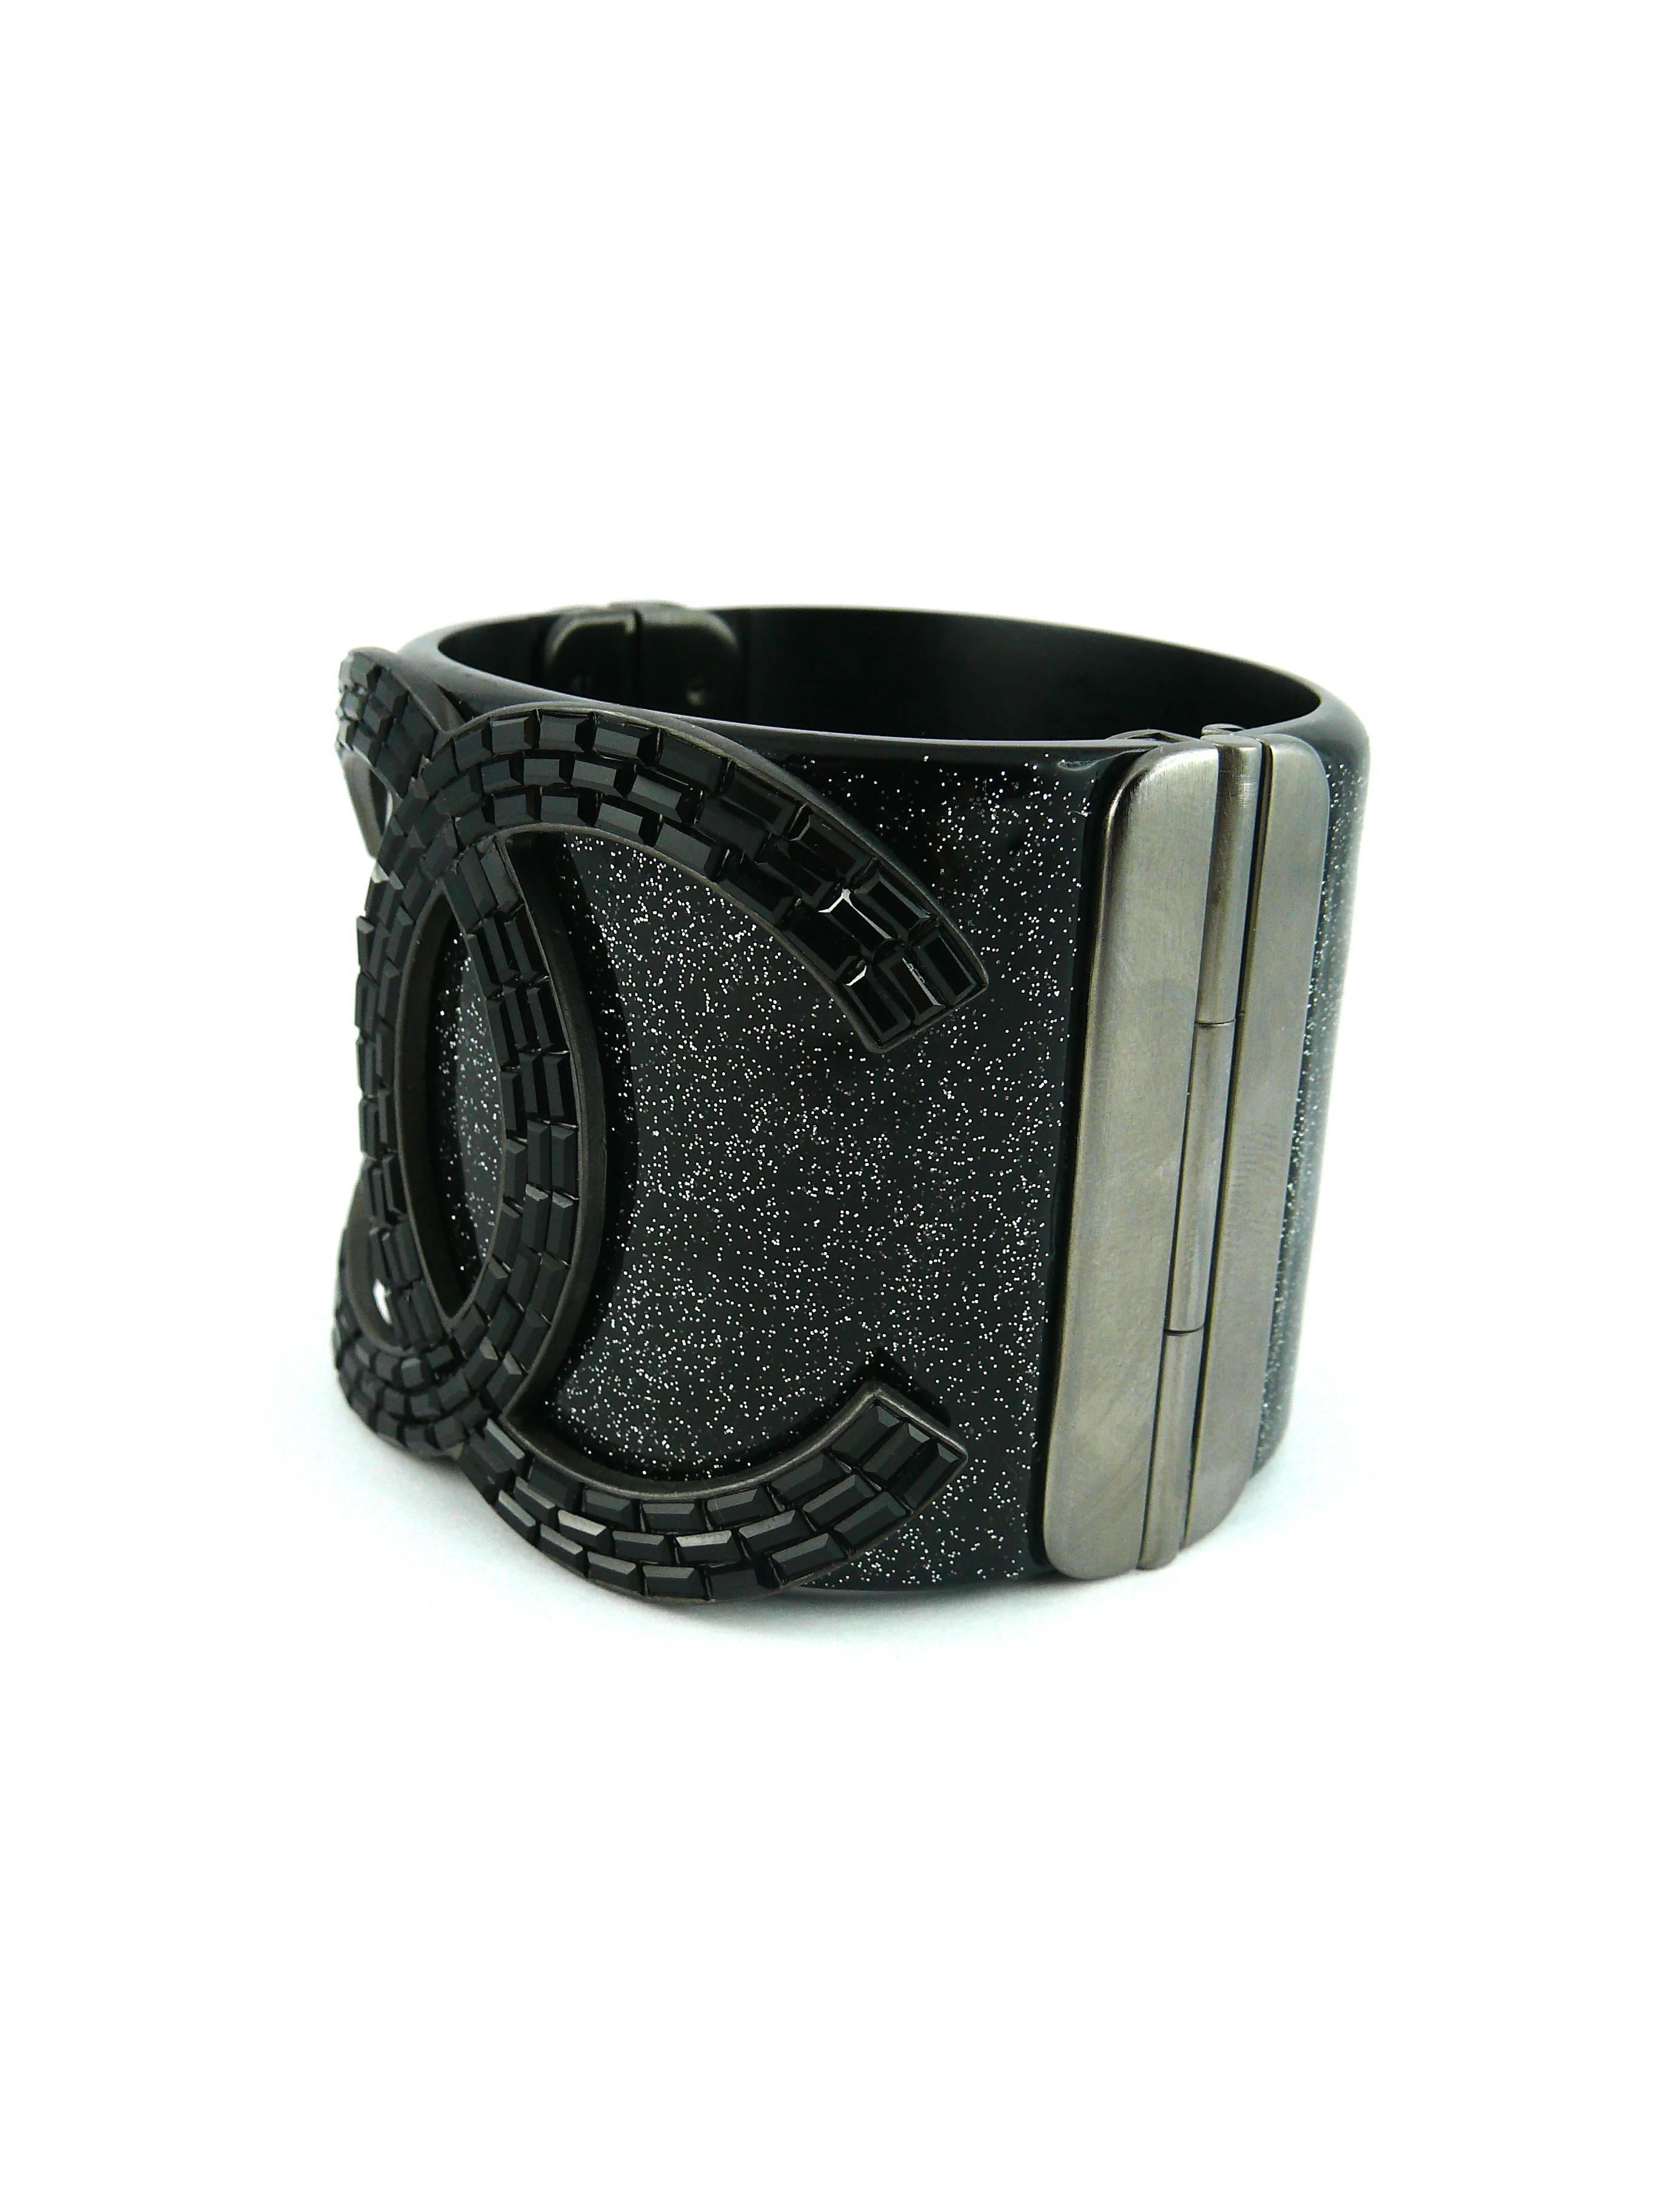 CHANEL rare glittering black resin cuff bracelet featuring a massive CC logo set with jet Swarovski crystal baguettes.

Spring / Summer Collection 2009.

Hinge clasp embossed with CC logo.

Stamped CHANEL 09 P Made in Italy.

Indicative